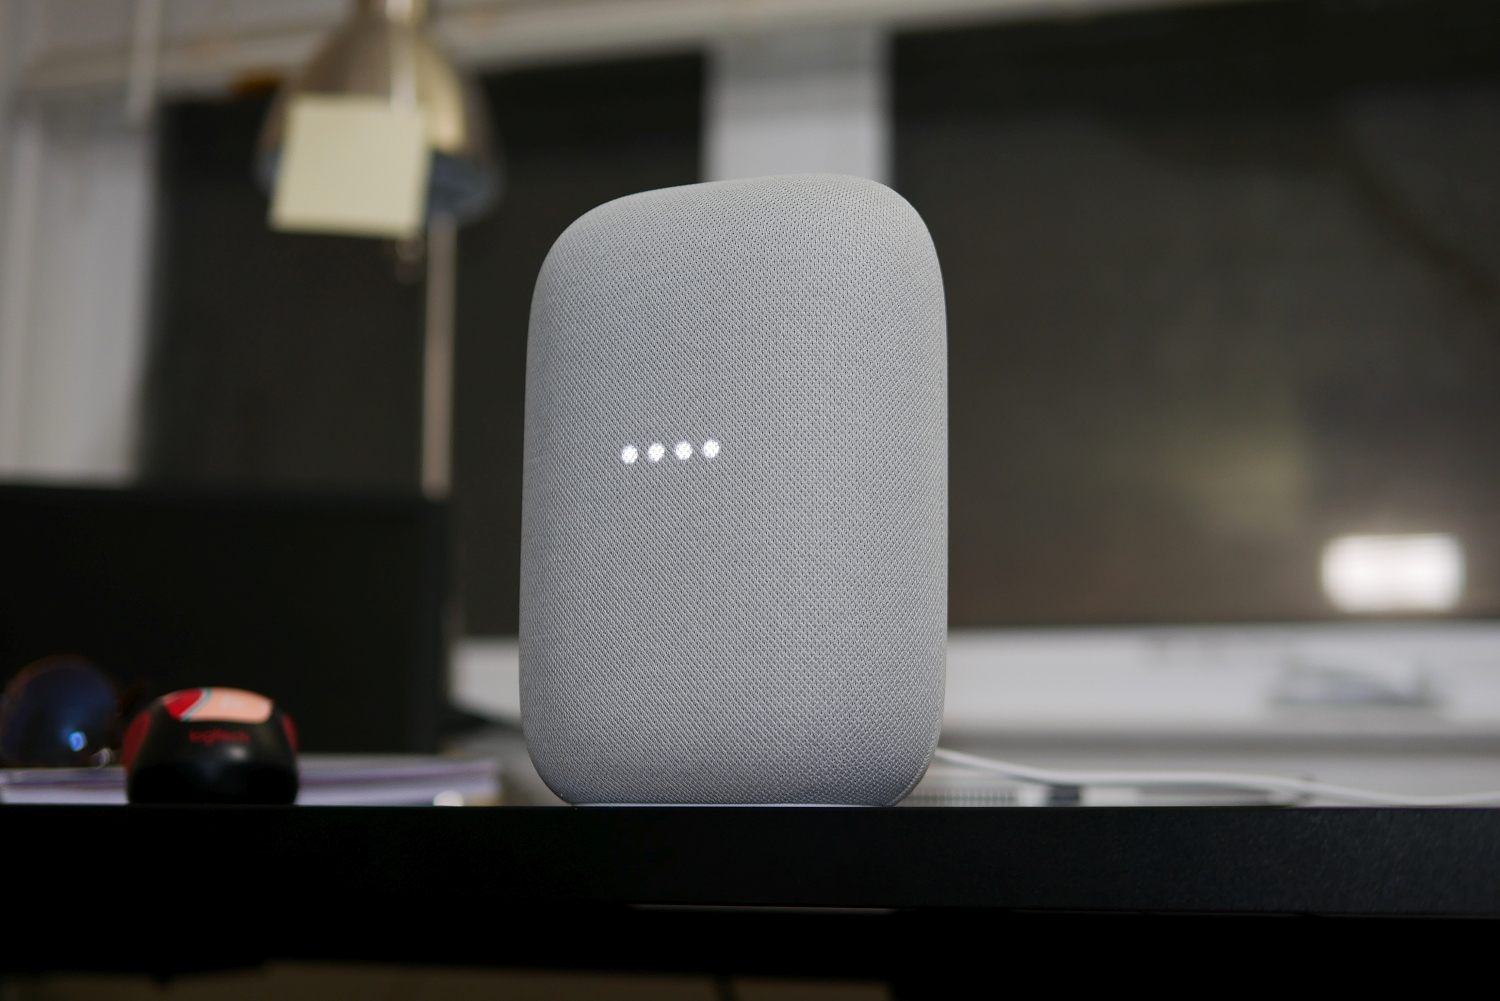 Google Nest Wifi Review: A powerful mesh system with smart speakers